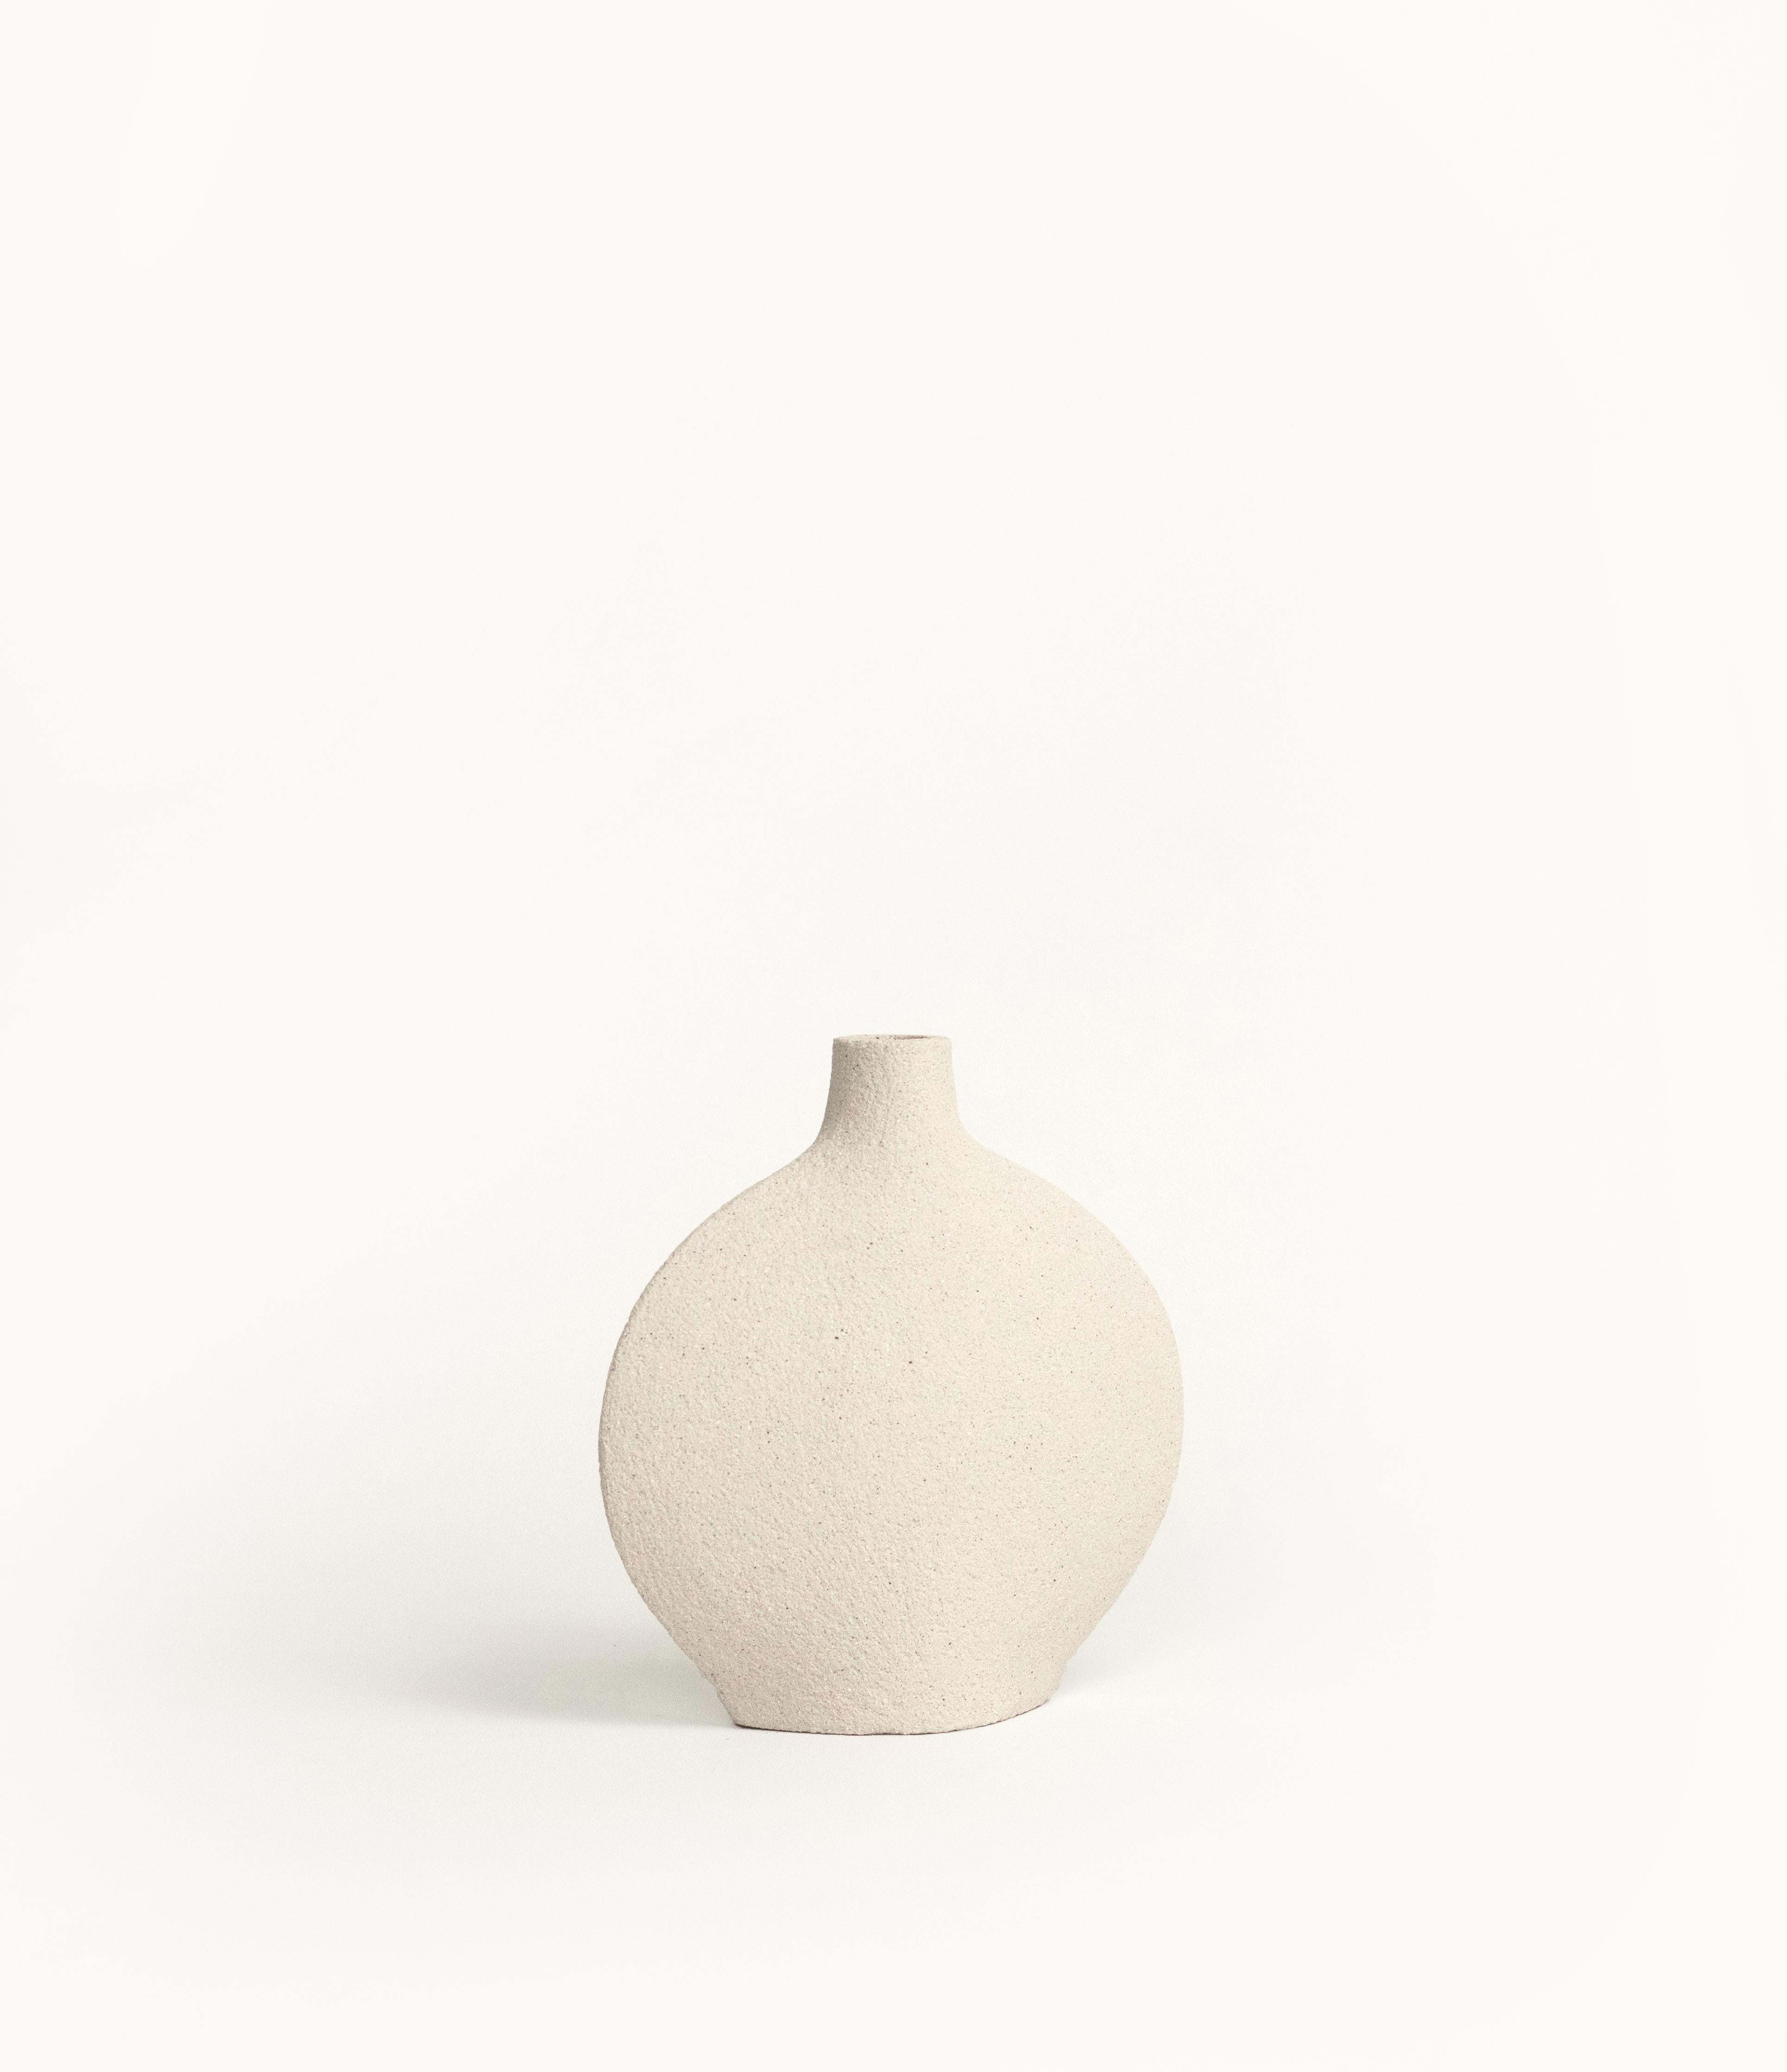 Goutte - white

Hand-crafted in our studio in France.

Measures: H: 15 CM / L: 24 CM
H: 6 INCH. / L: 6.3 INCH.

- Stoneware fired at high temperature finished with transparent glossy glaze inside.
- Raw exterior showcasing the natural aspect